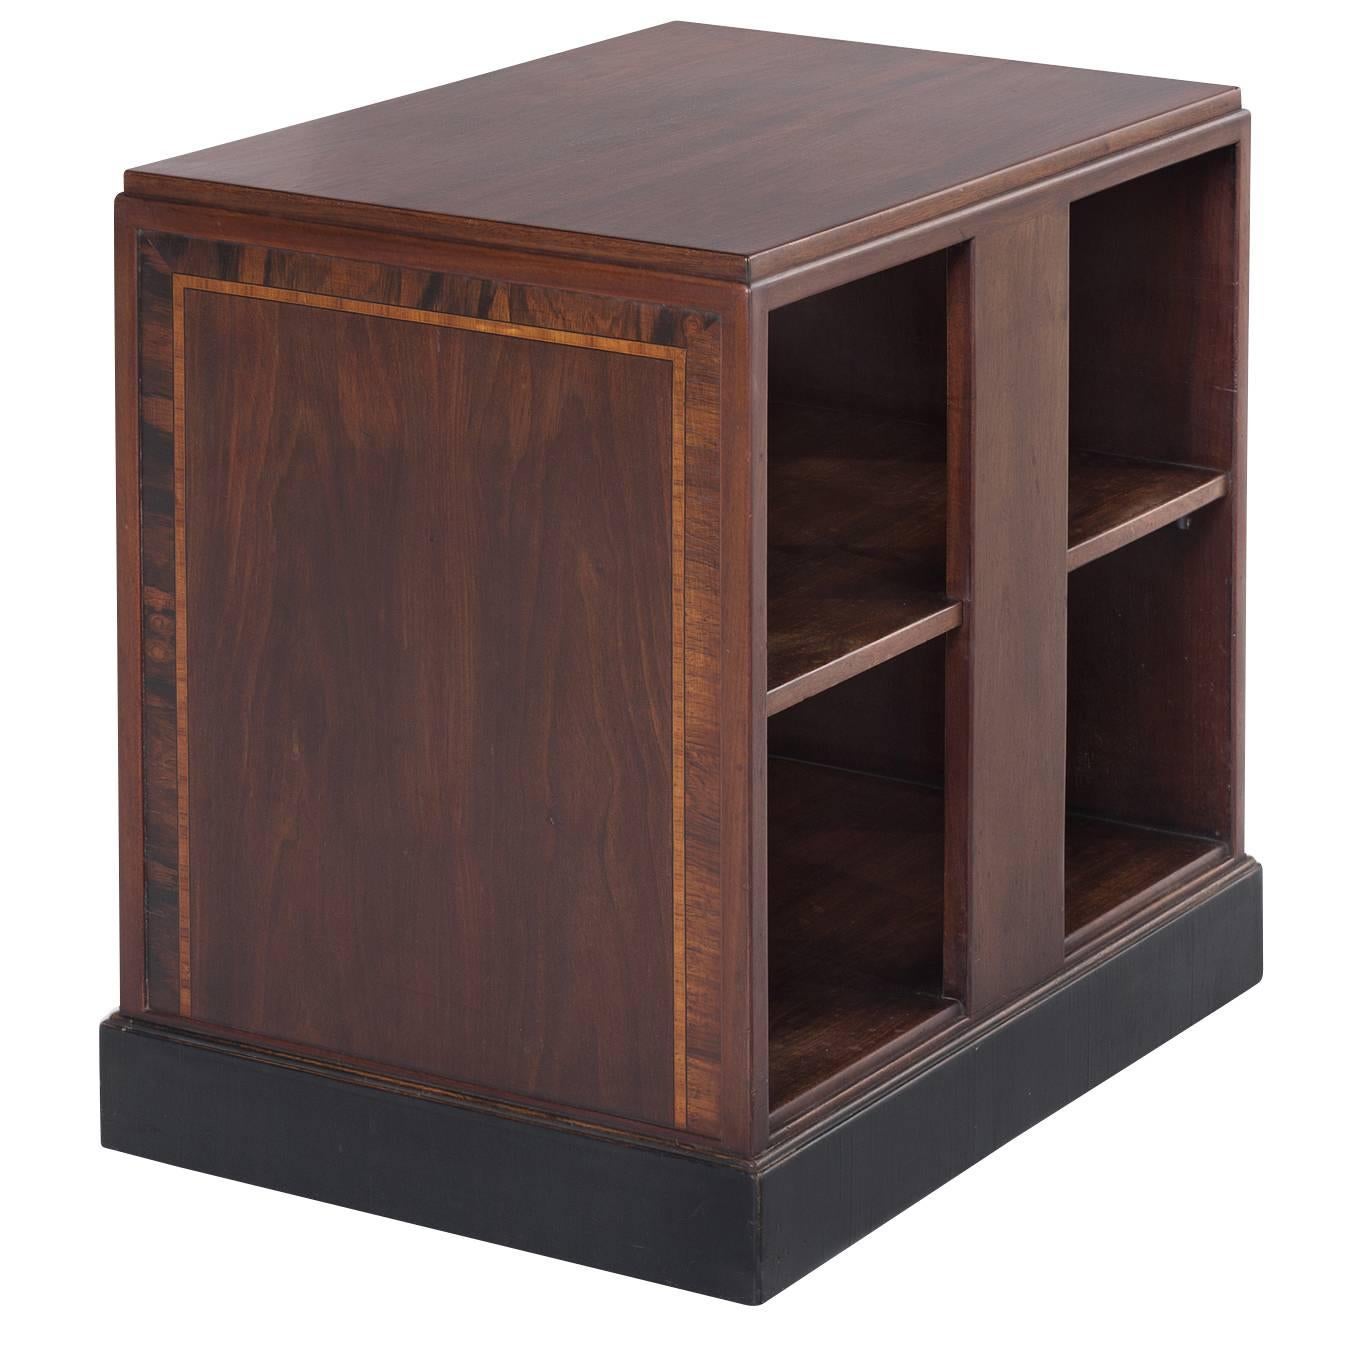 H.P. Mutters Small Cabinet with Inlayed Wood